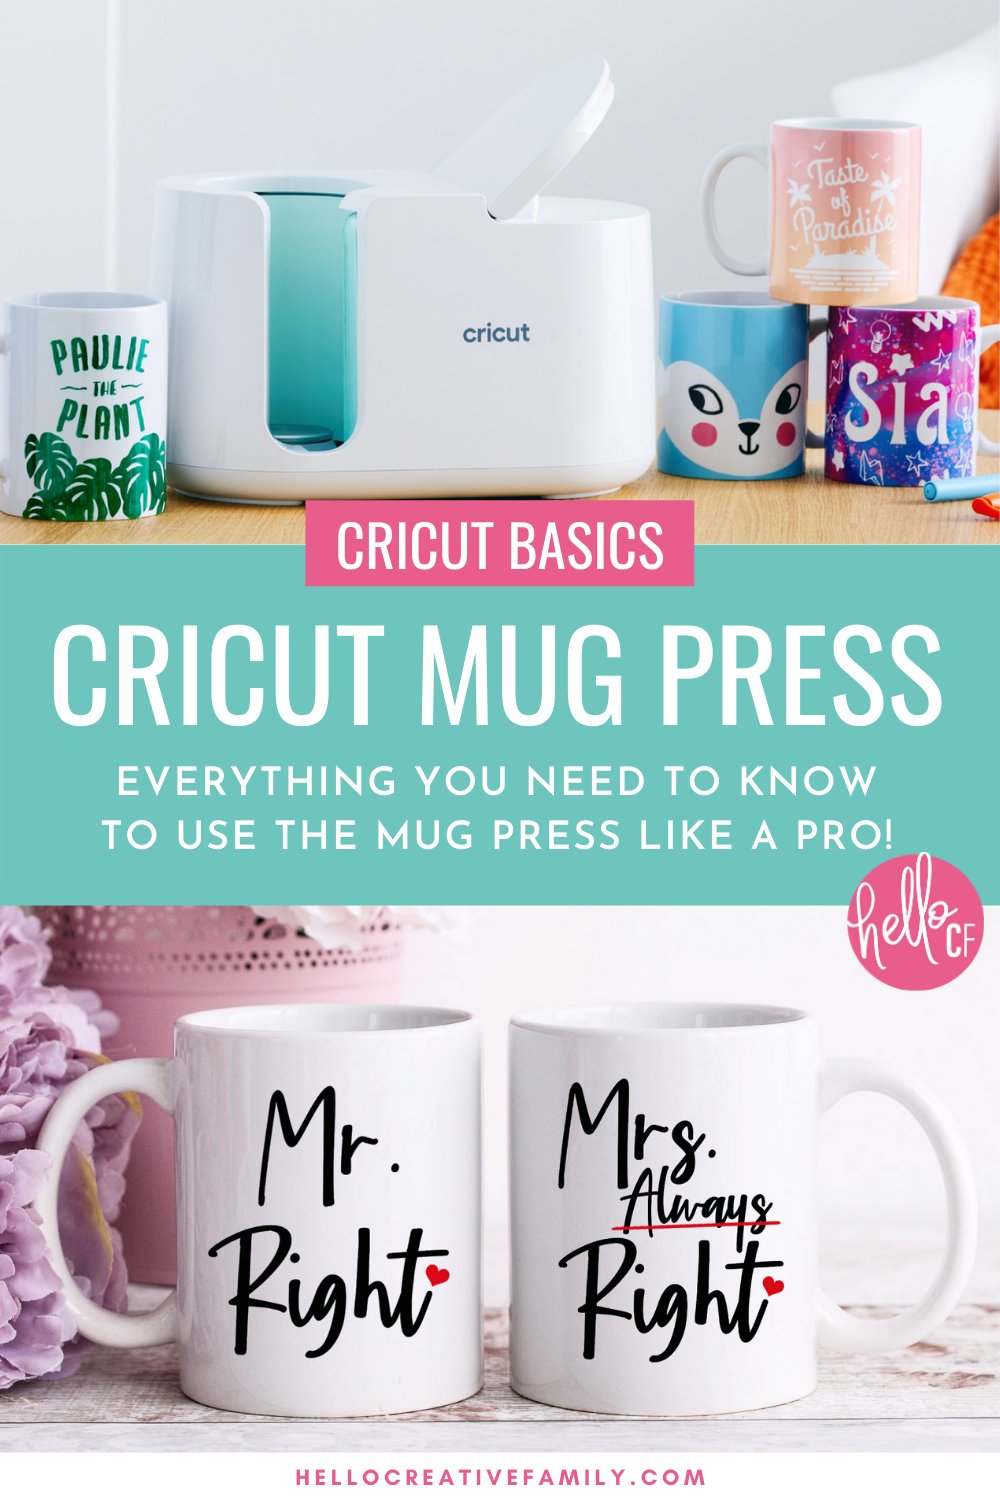 Curious about the Cricut Mug Press? We're sharing Everything You Need To Know For How To Use The Cricut Mug Press from free design ideas, to step-by-step instructions for creating your first mug, to what kinds of mugs you can use with your Cricut Mug Press! If you love crafting with your Cricut Maker, Cricut Explore Air 2 or Cricut Joy you won't want to miss this you won't want to miss this info packed article that shows you everything you need to know to make a DIY mug with your Cricut!